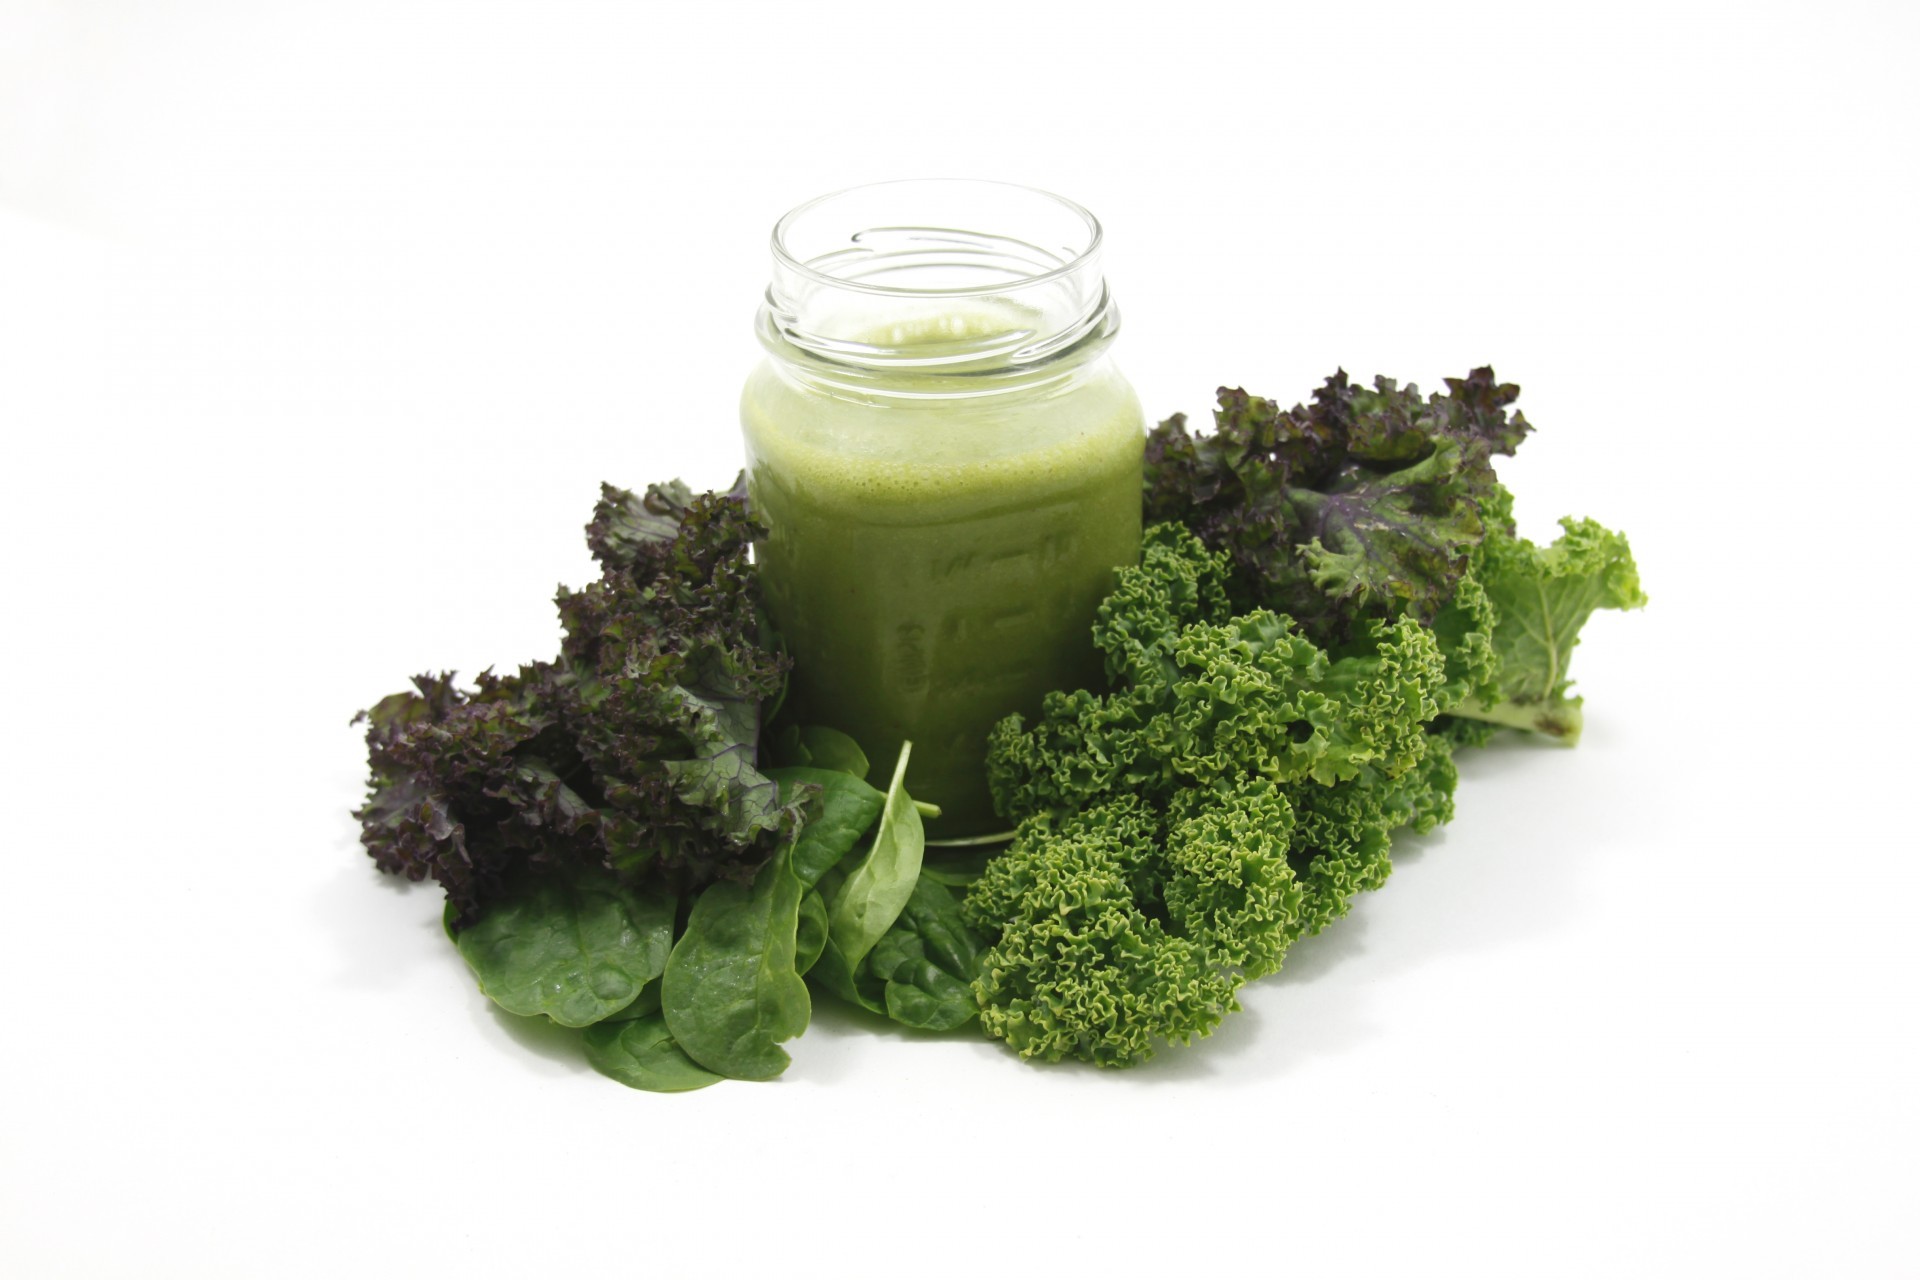 healthy-green-smoothie-drink